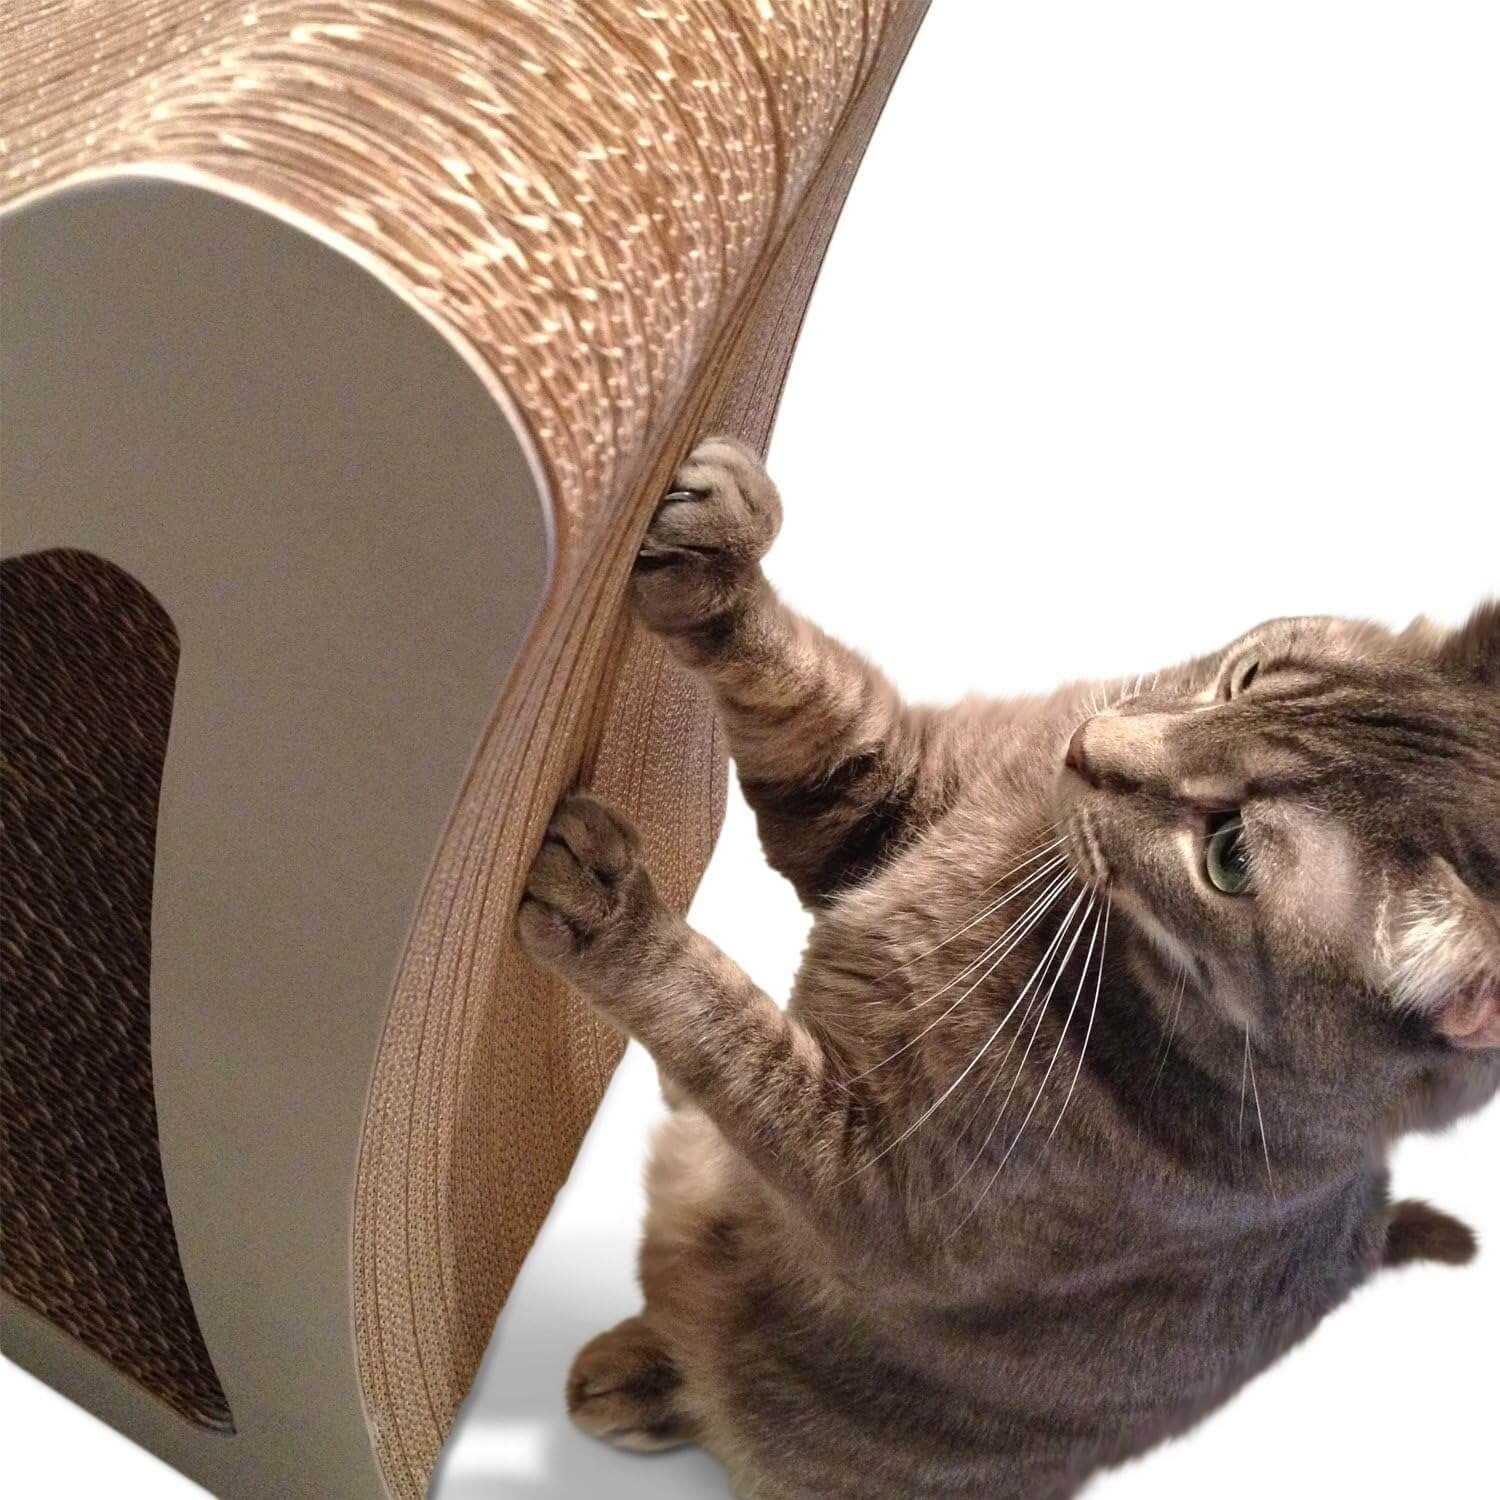 The Petfusion 3 Sided Vertical Cat Scratching Post meets your cat's scratching needs